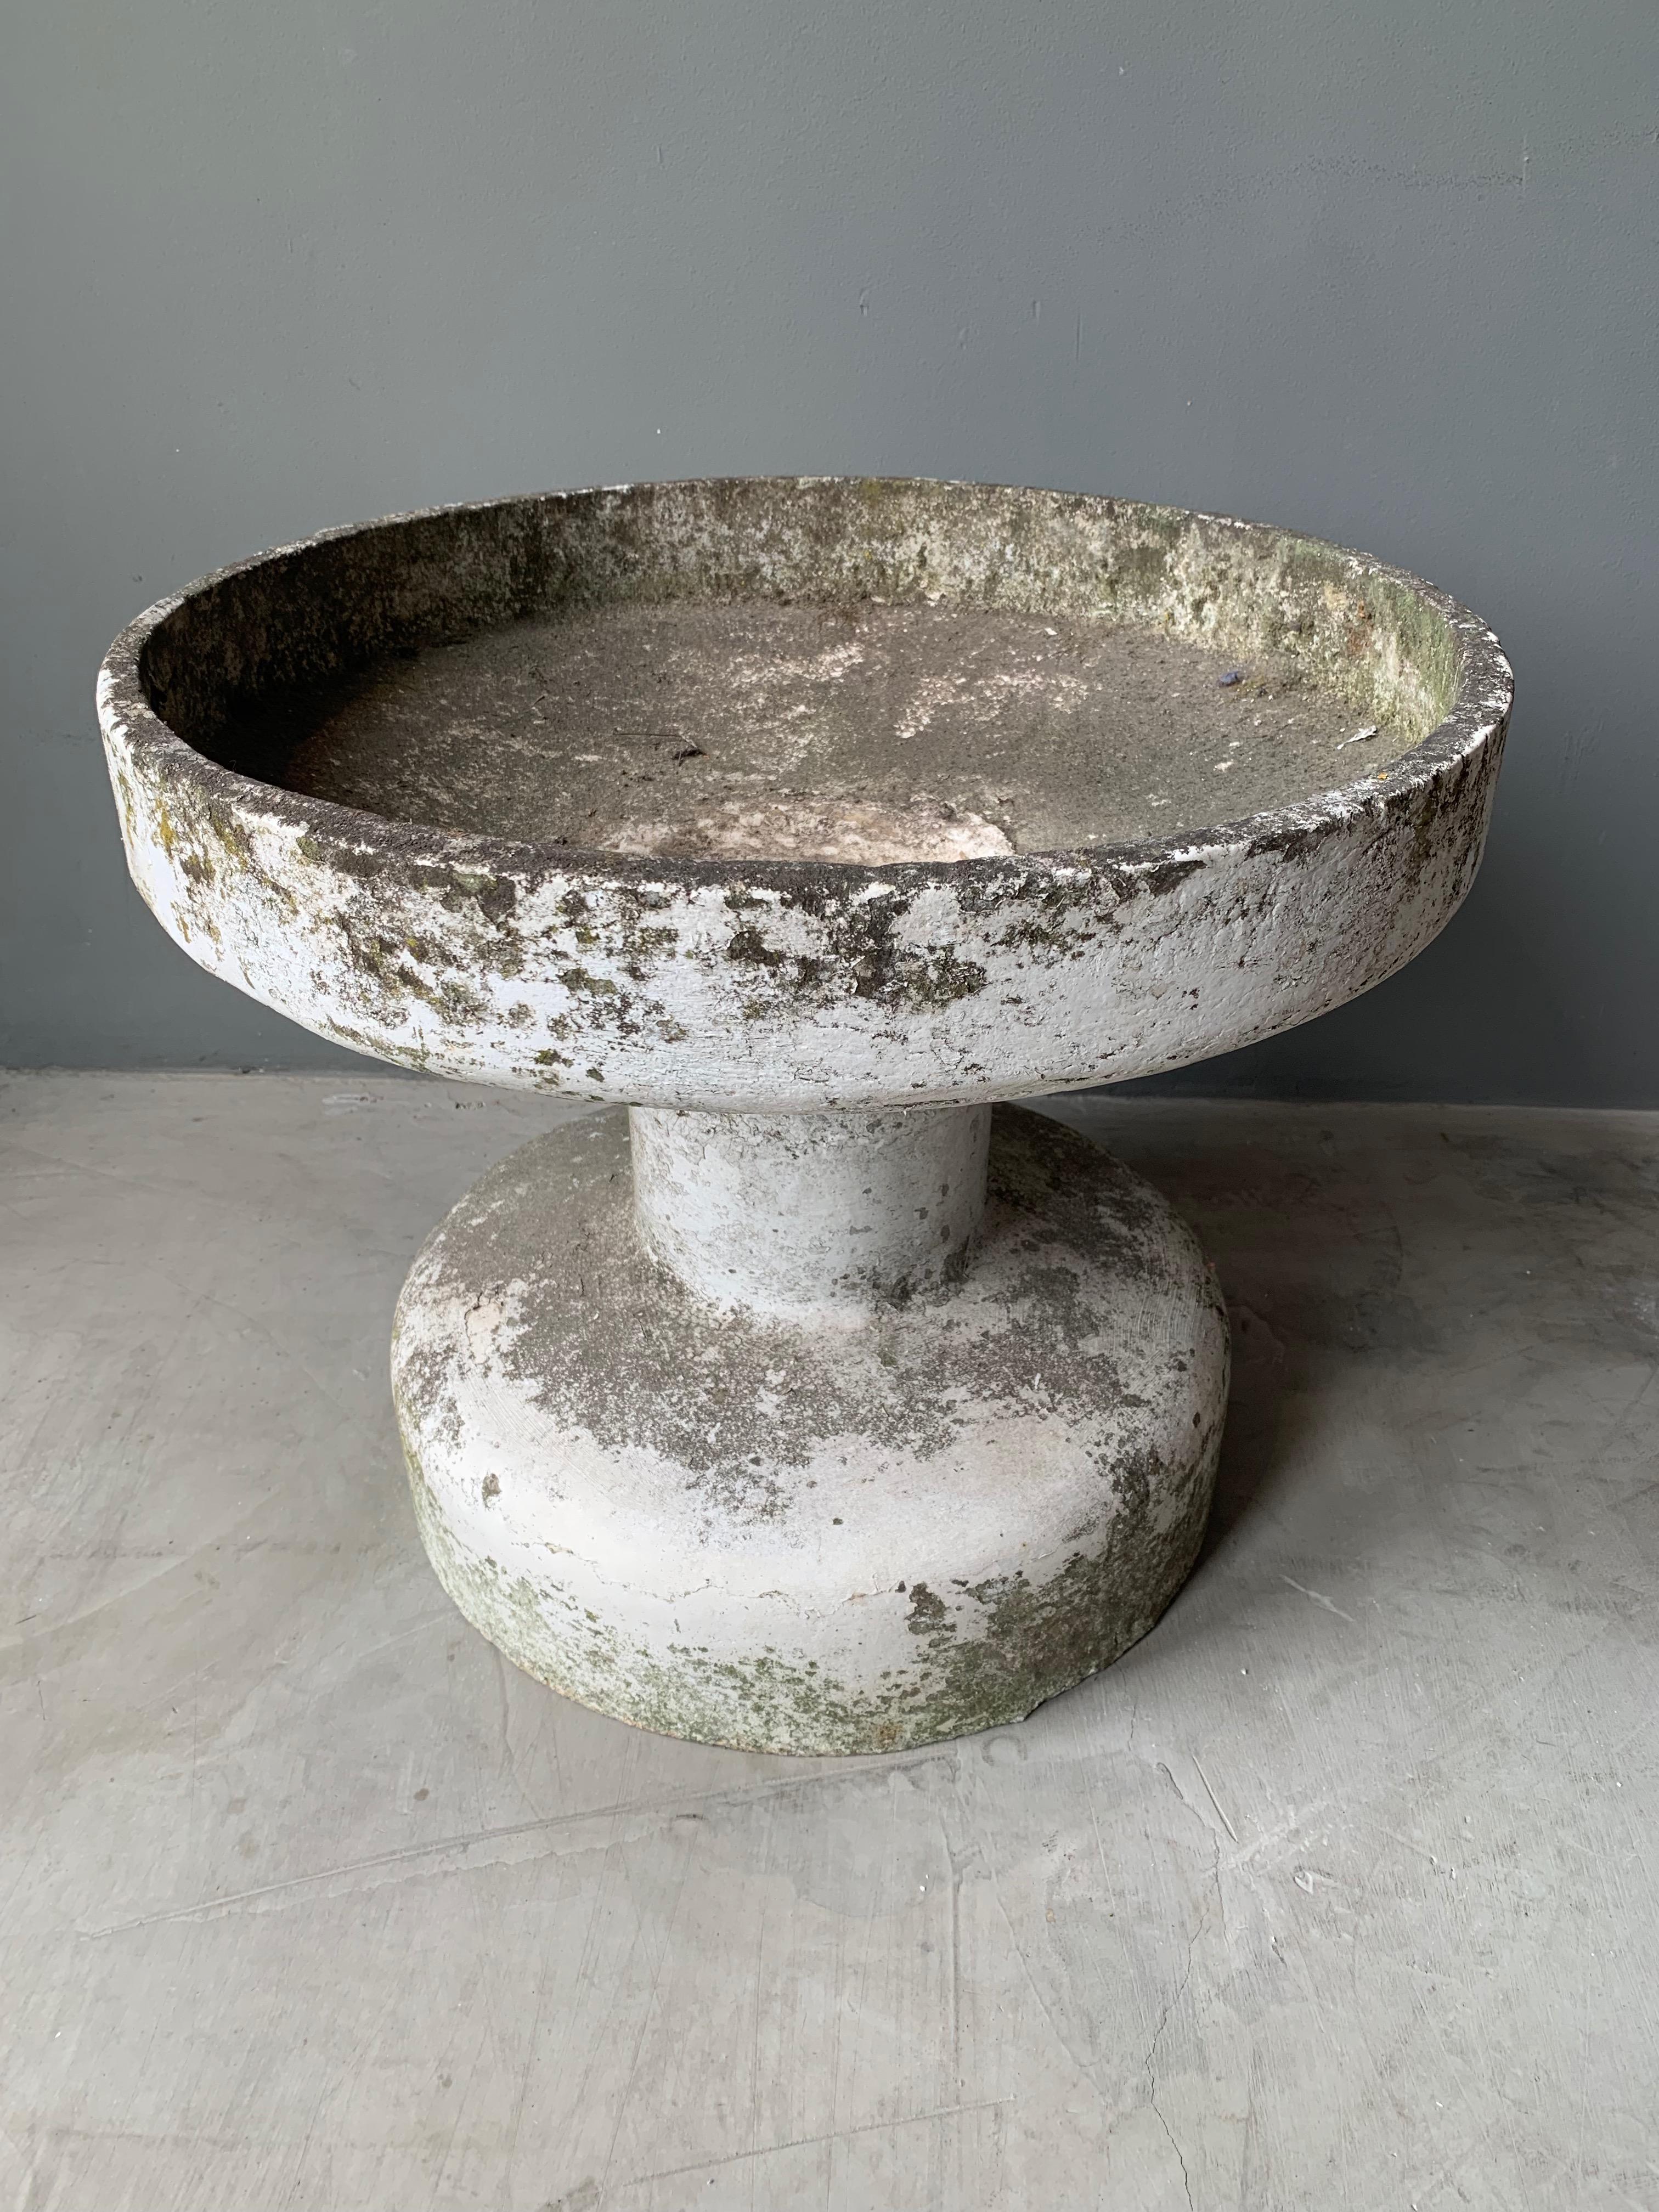 Rare concrete fountain by Willy Guhl for Eternit. Fabricated out of cement. Great sculpture and object. Bowl has factory drilled holes to allow water to pass through. Stunning piece. 

    

   